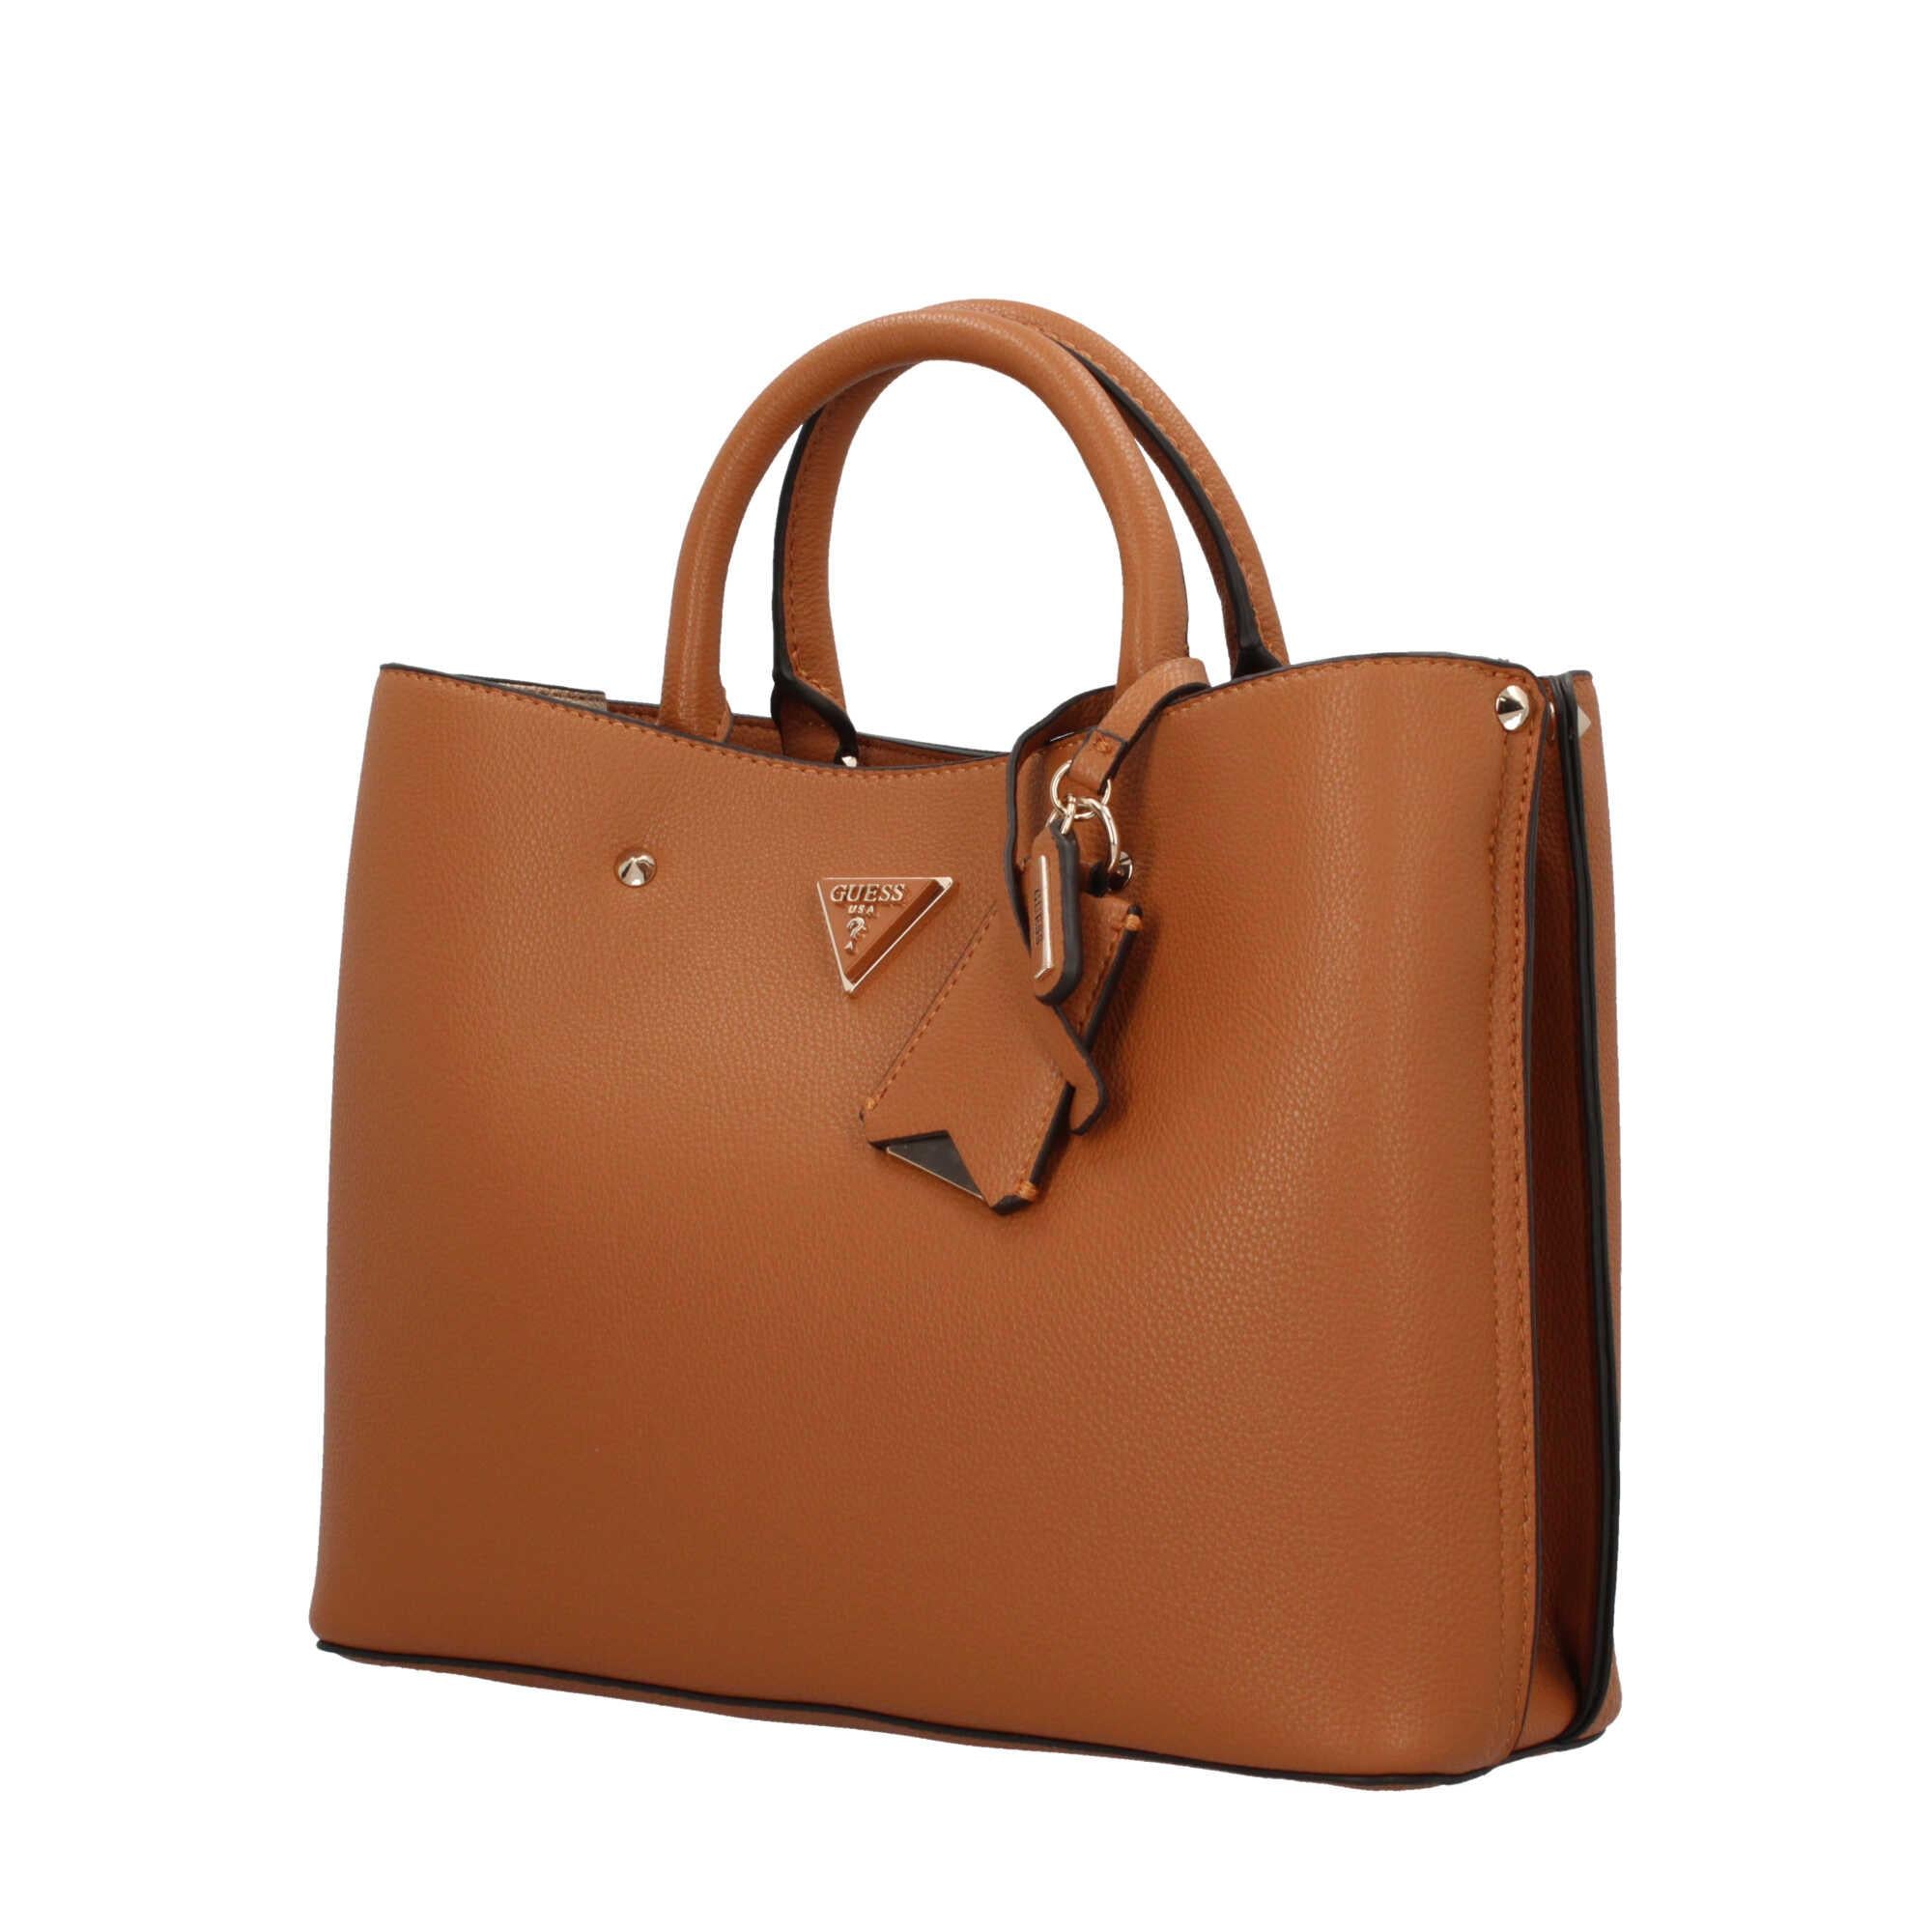 Borsa a mano in ecopelle Guess Meridian